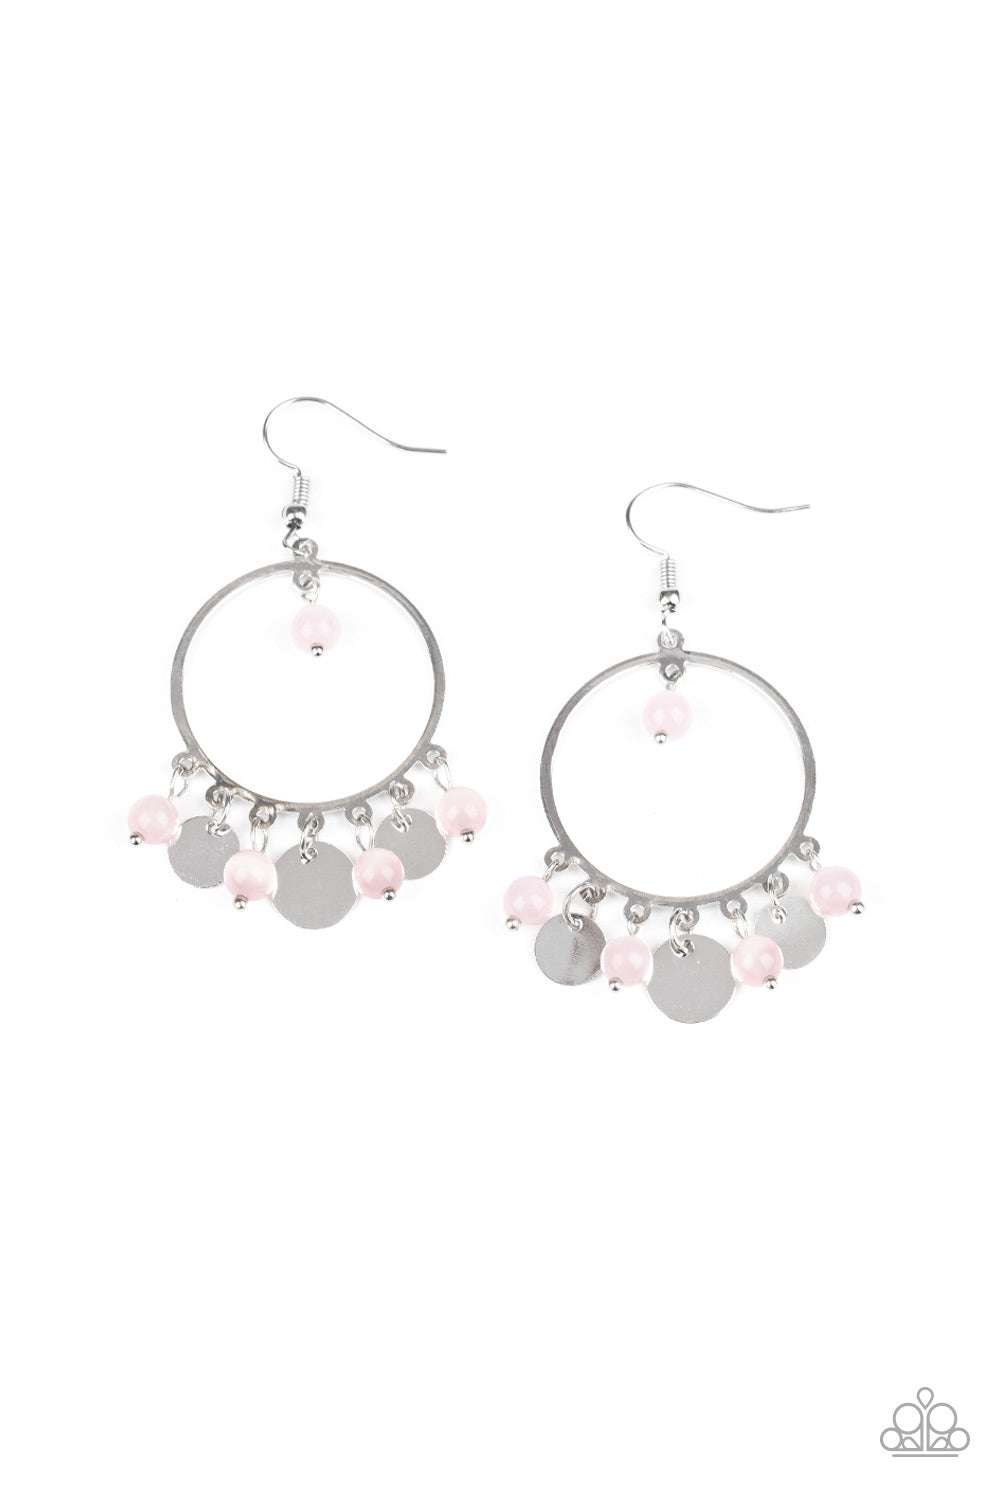 Bubbly Buoyancy - Pink Item #E352 Dainty silver discs and glassy pink beads swing from the bottom of a shimmery silver hoop, creating a colorful fringe. A solitaire pink bead swings from the top of the hoop for a bubbly finish. Earring attaches to a standard fishhook fitting. All Paparazzi Accessories are lead free and nickel free!  Sold as one pair of earrings.